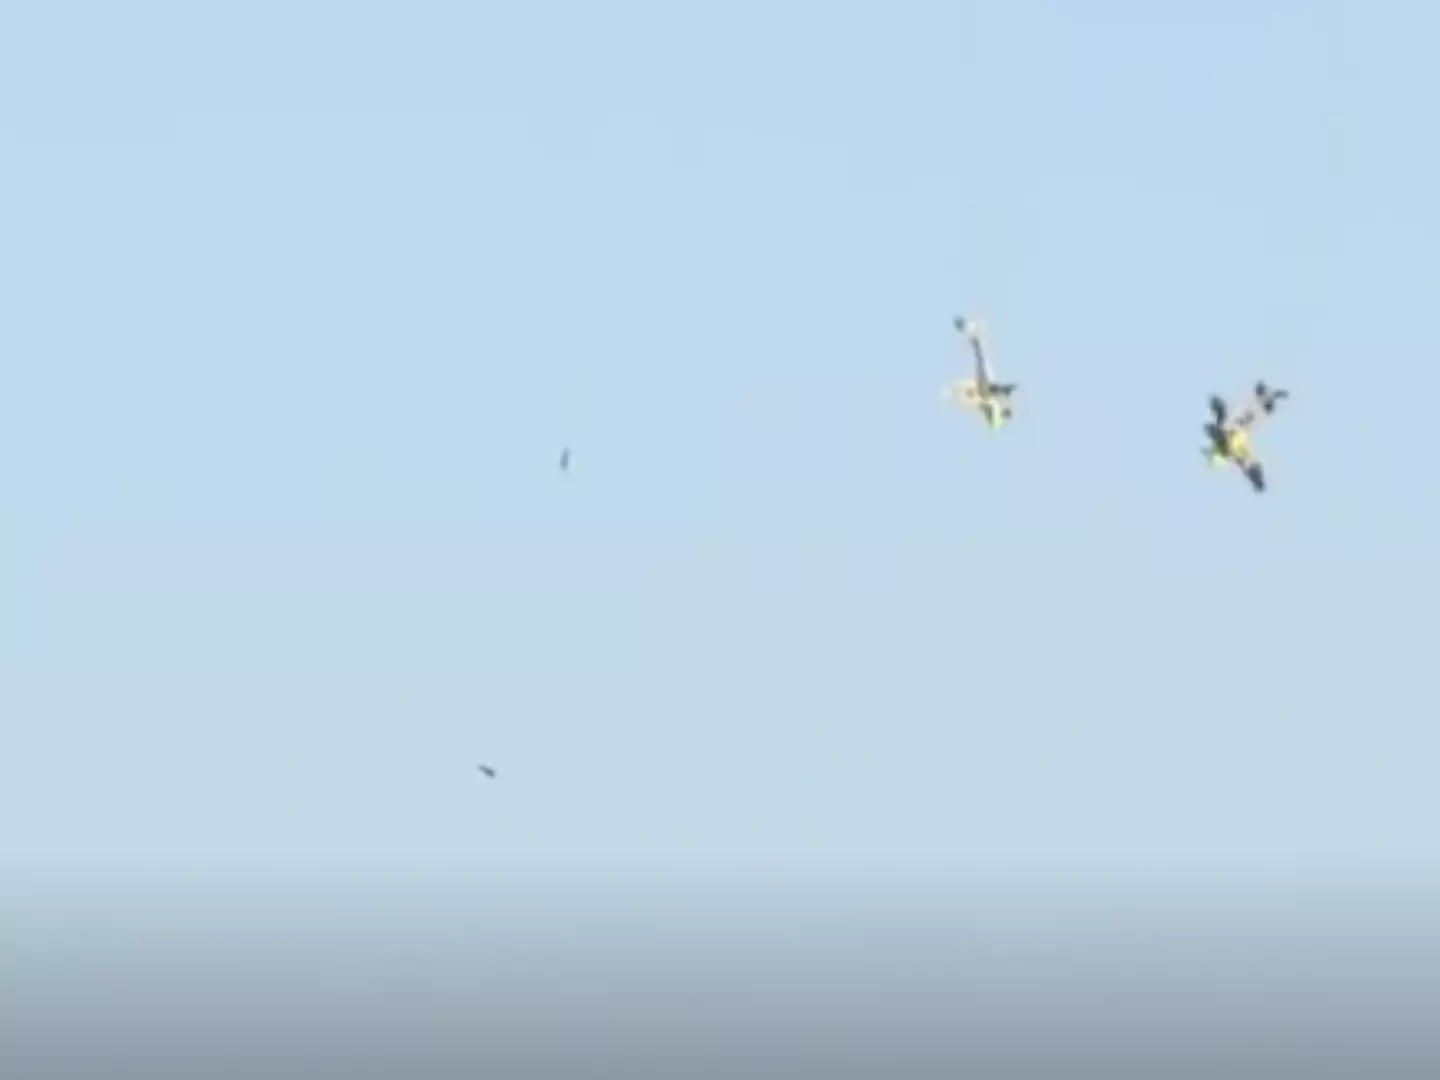 The two planes almost collided after the stunt went horribly wrong.